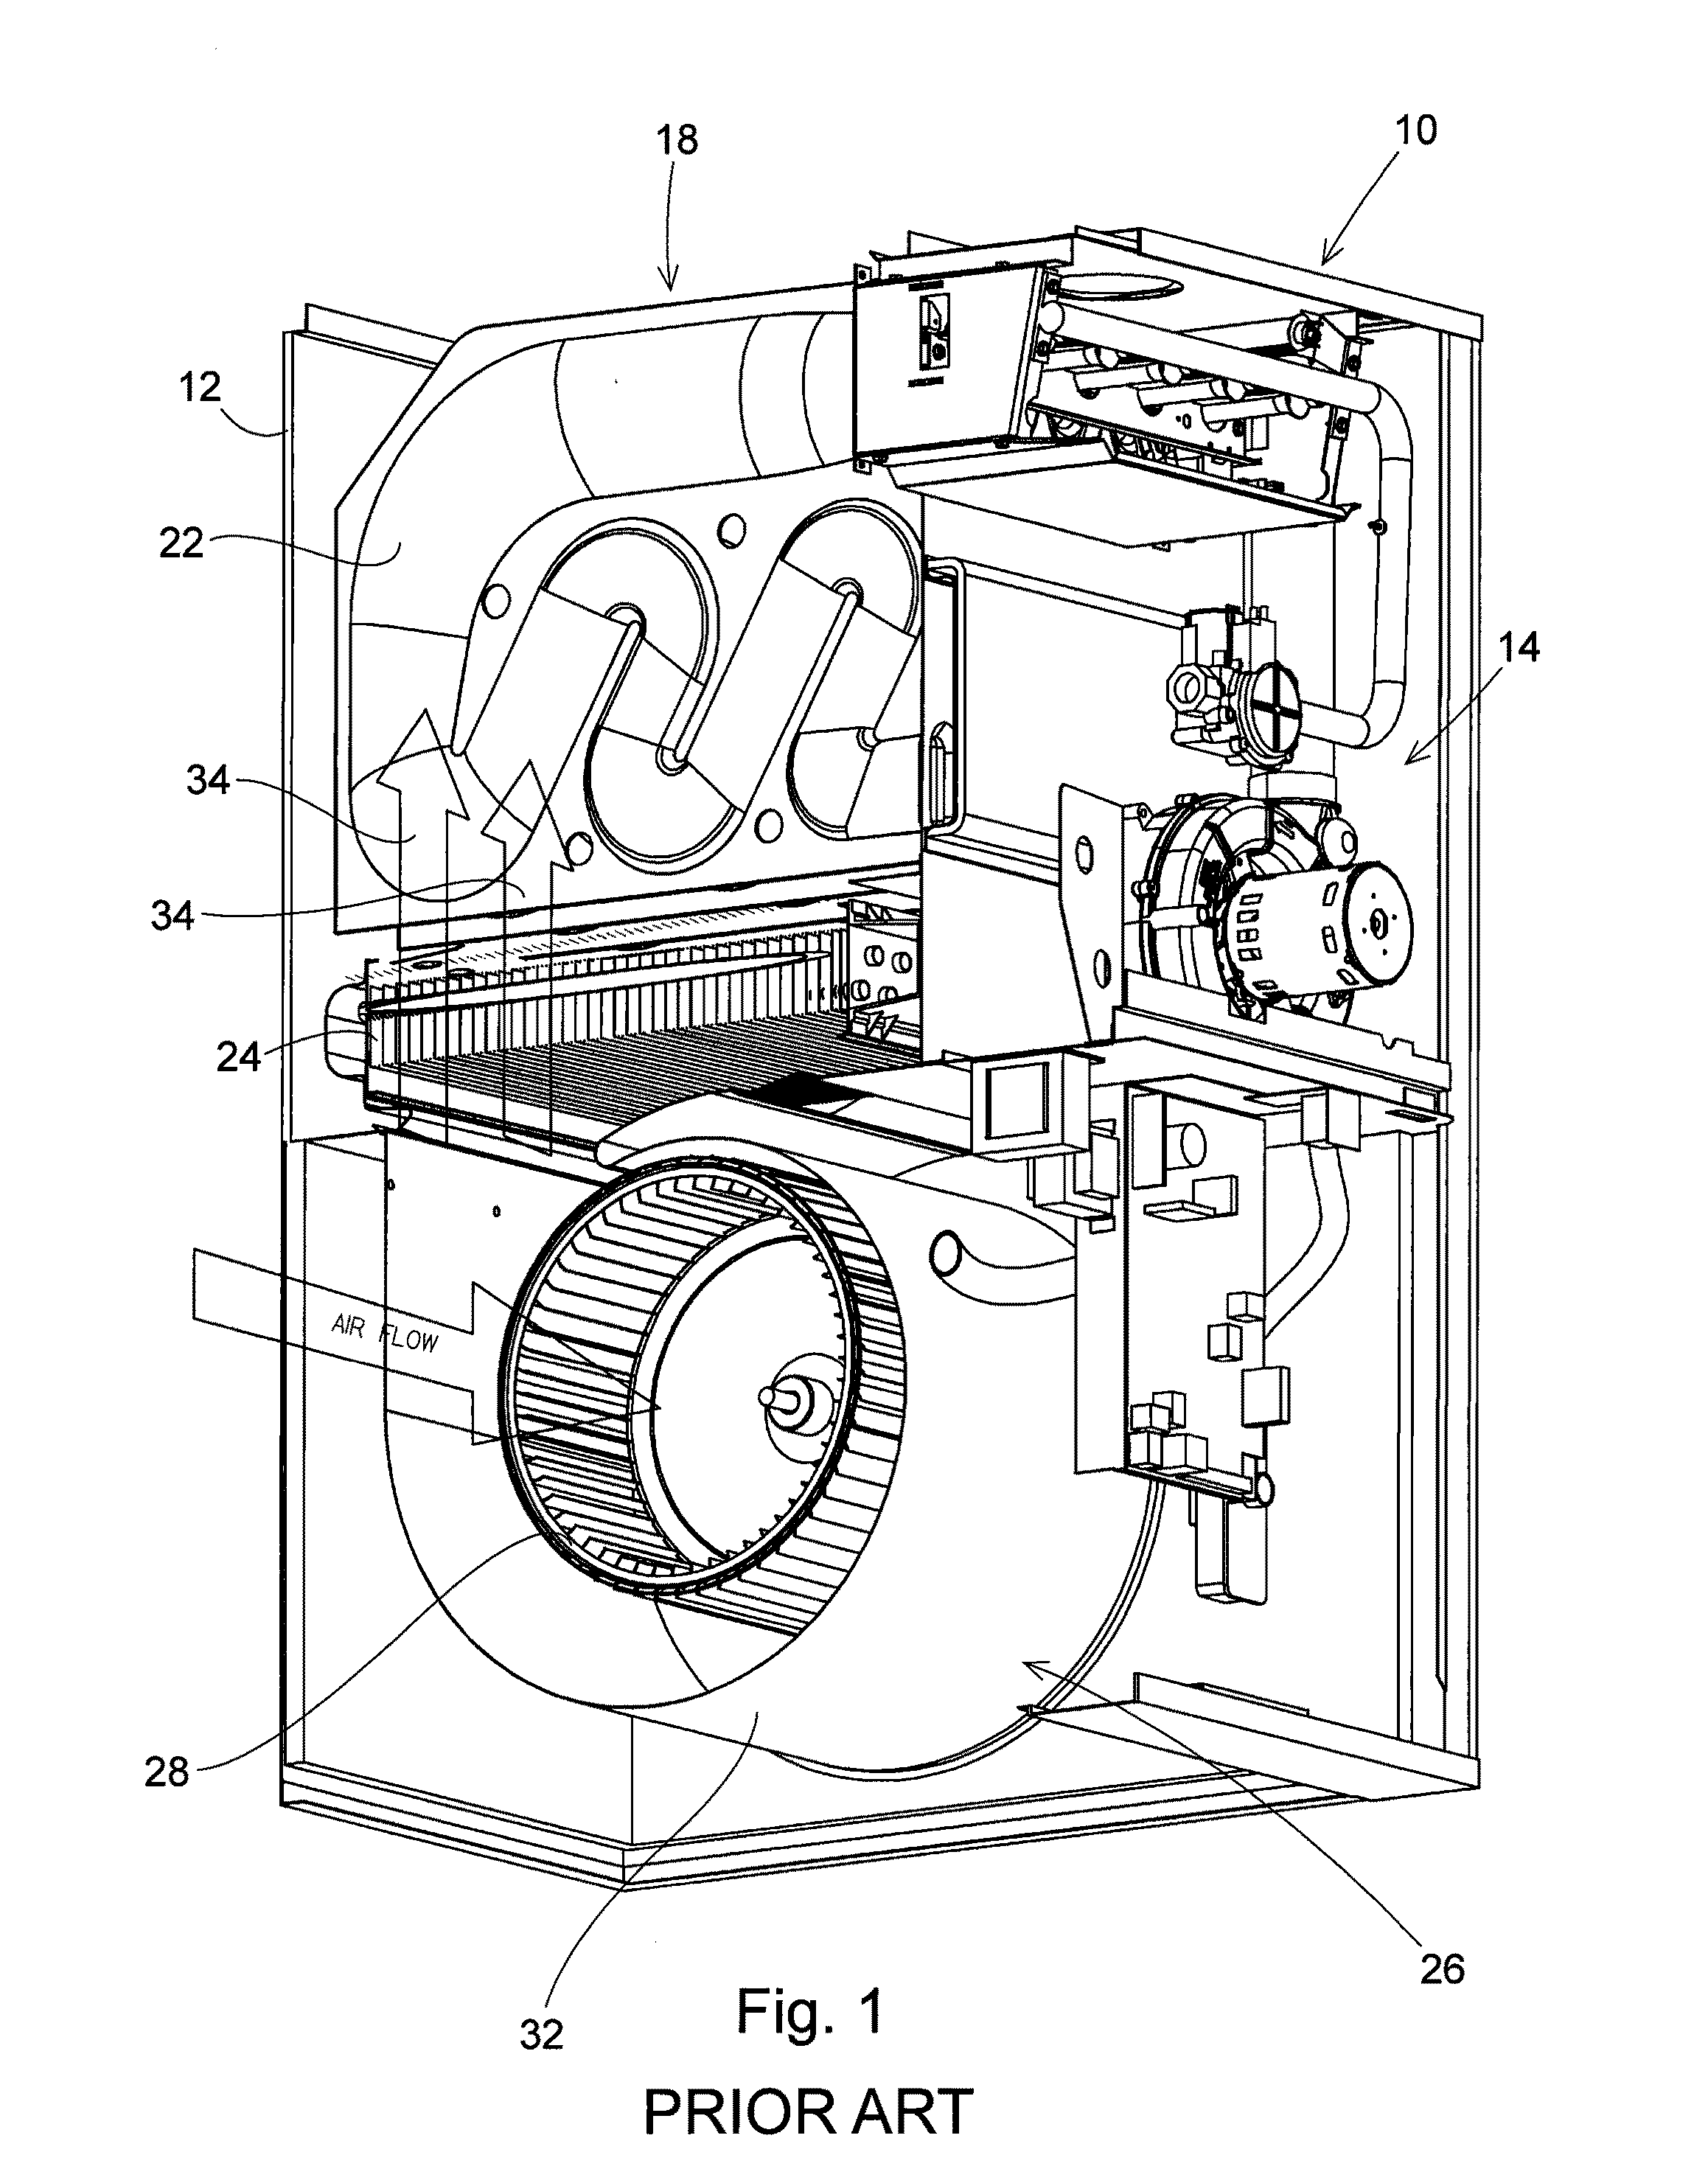 Furnace Air Handler Blower Housing with an Enlarged Air Outlet Opening